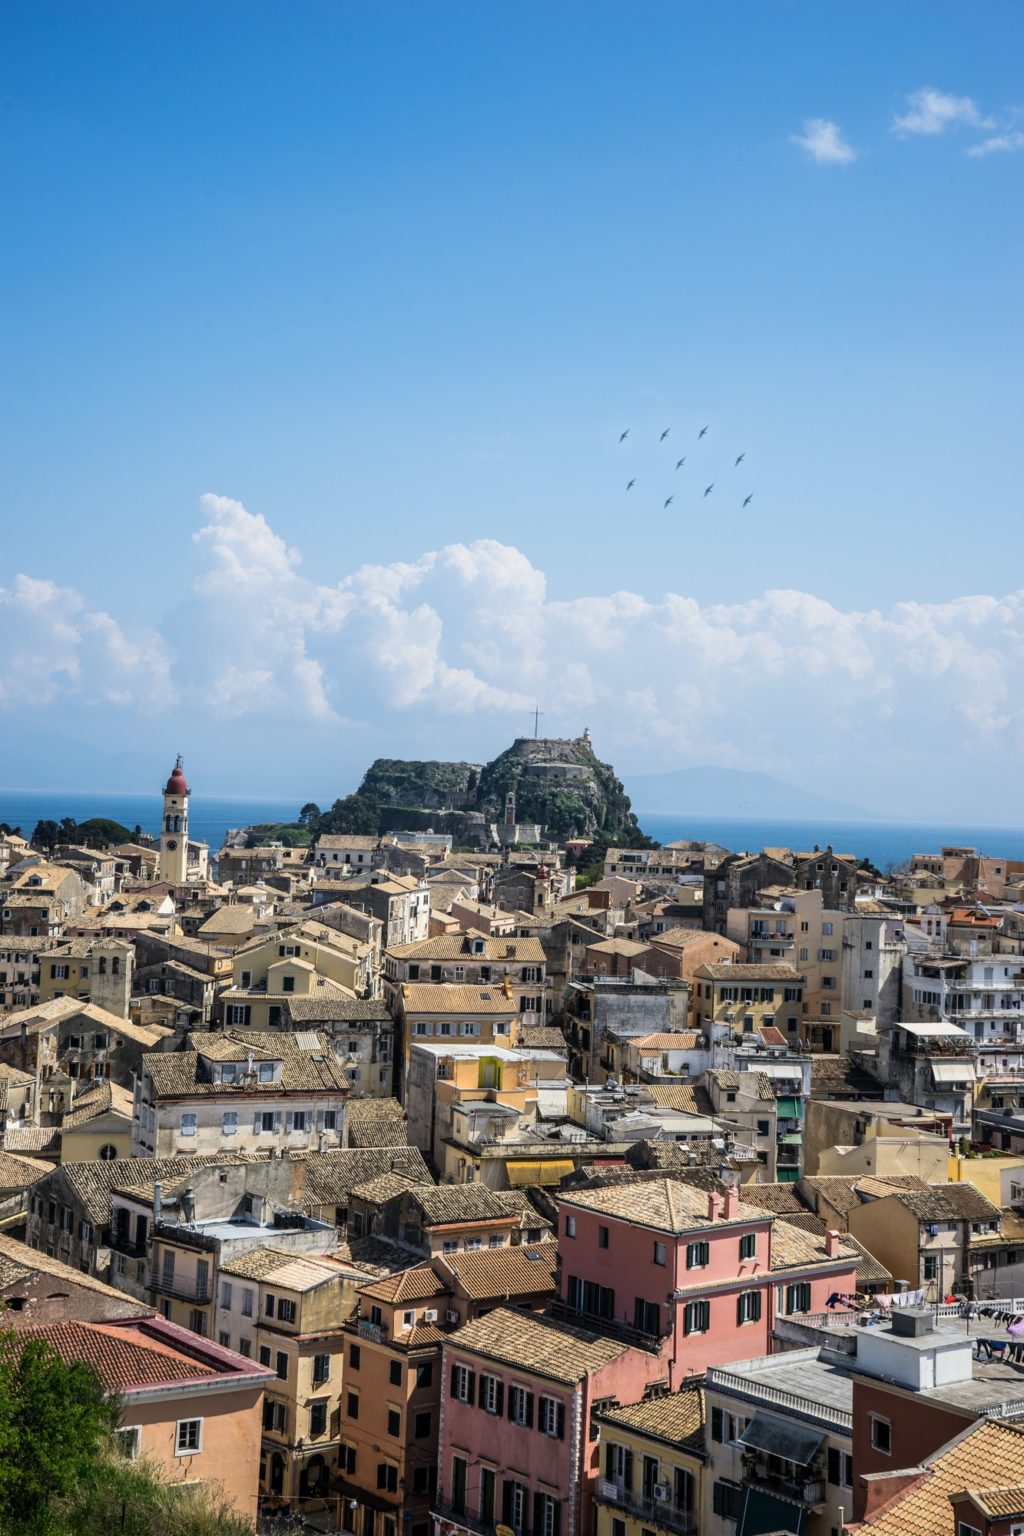 View of the historic center of Corfu town, Greece